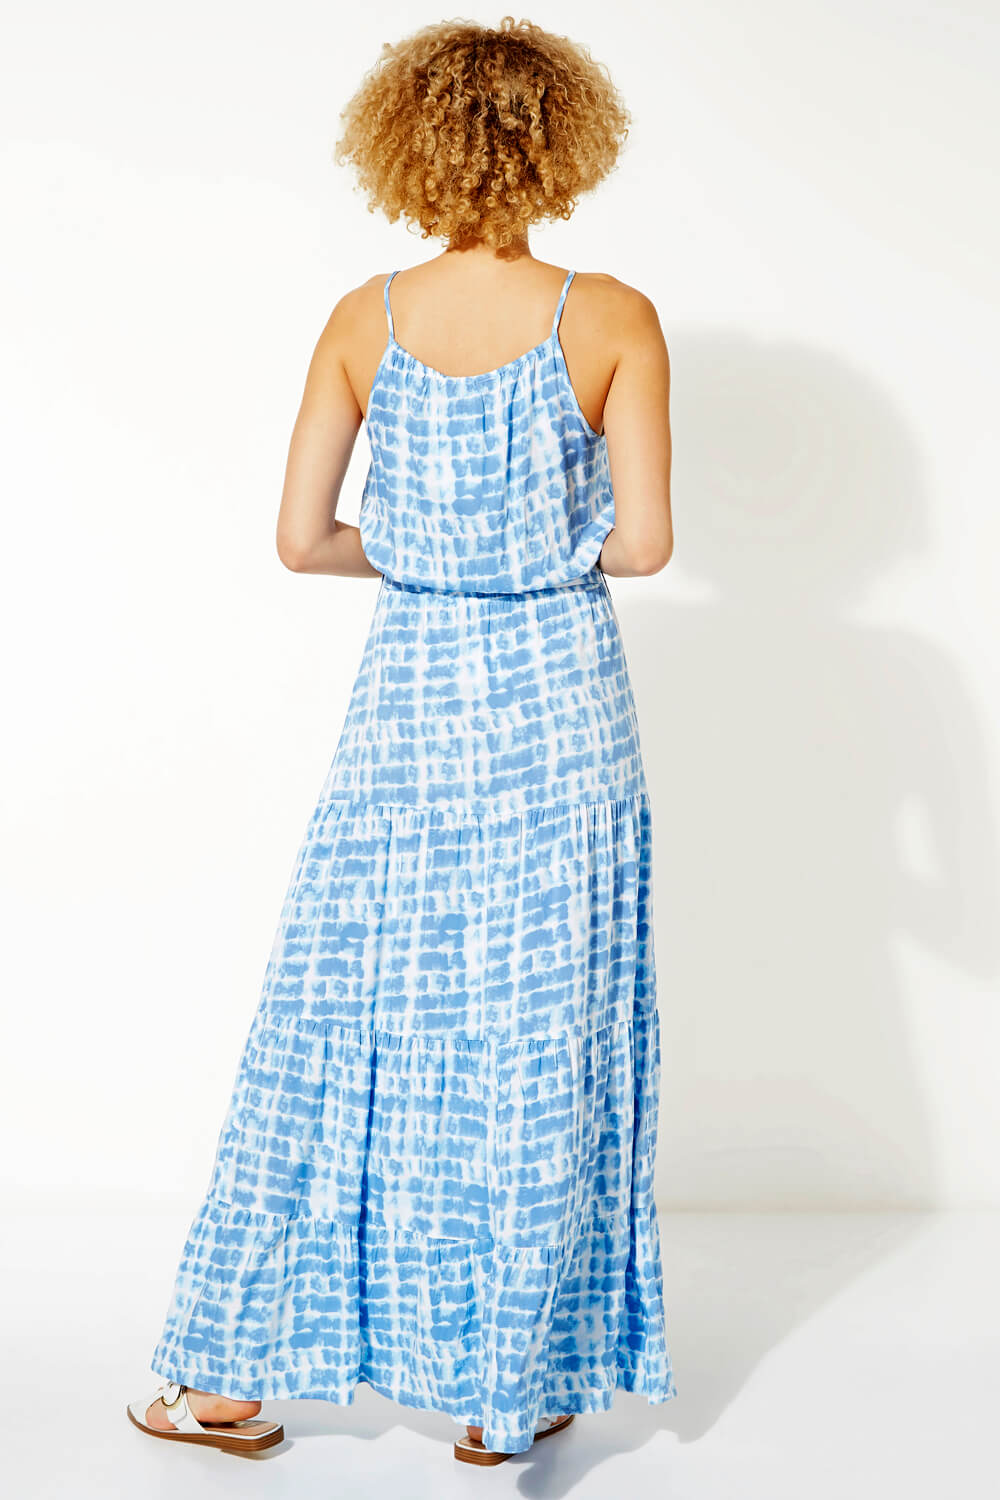 Blue Tie Dye Tiered Maxi Dress, Image 2 of 4